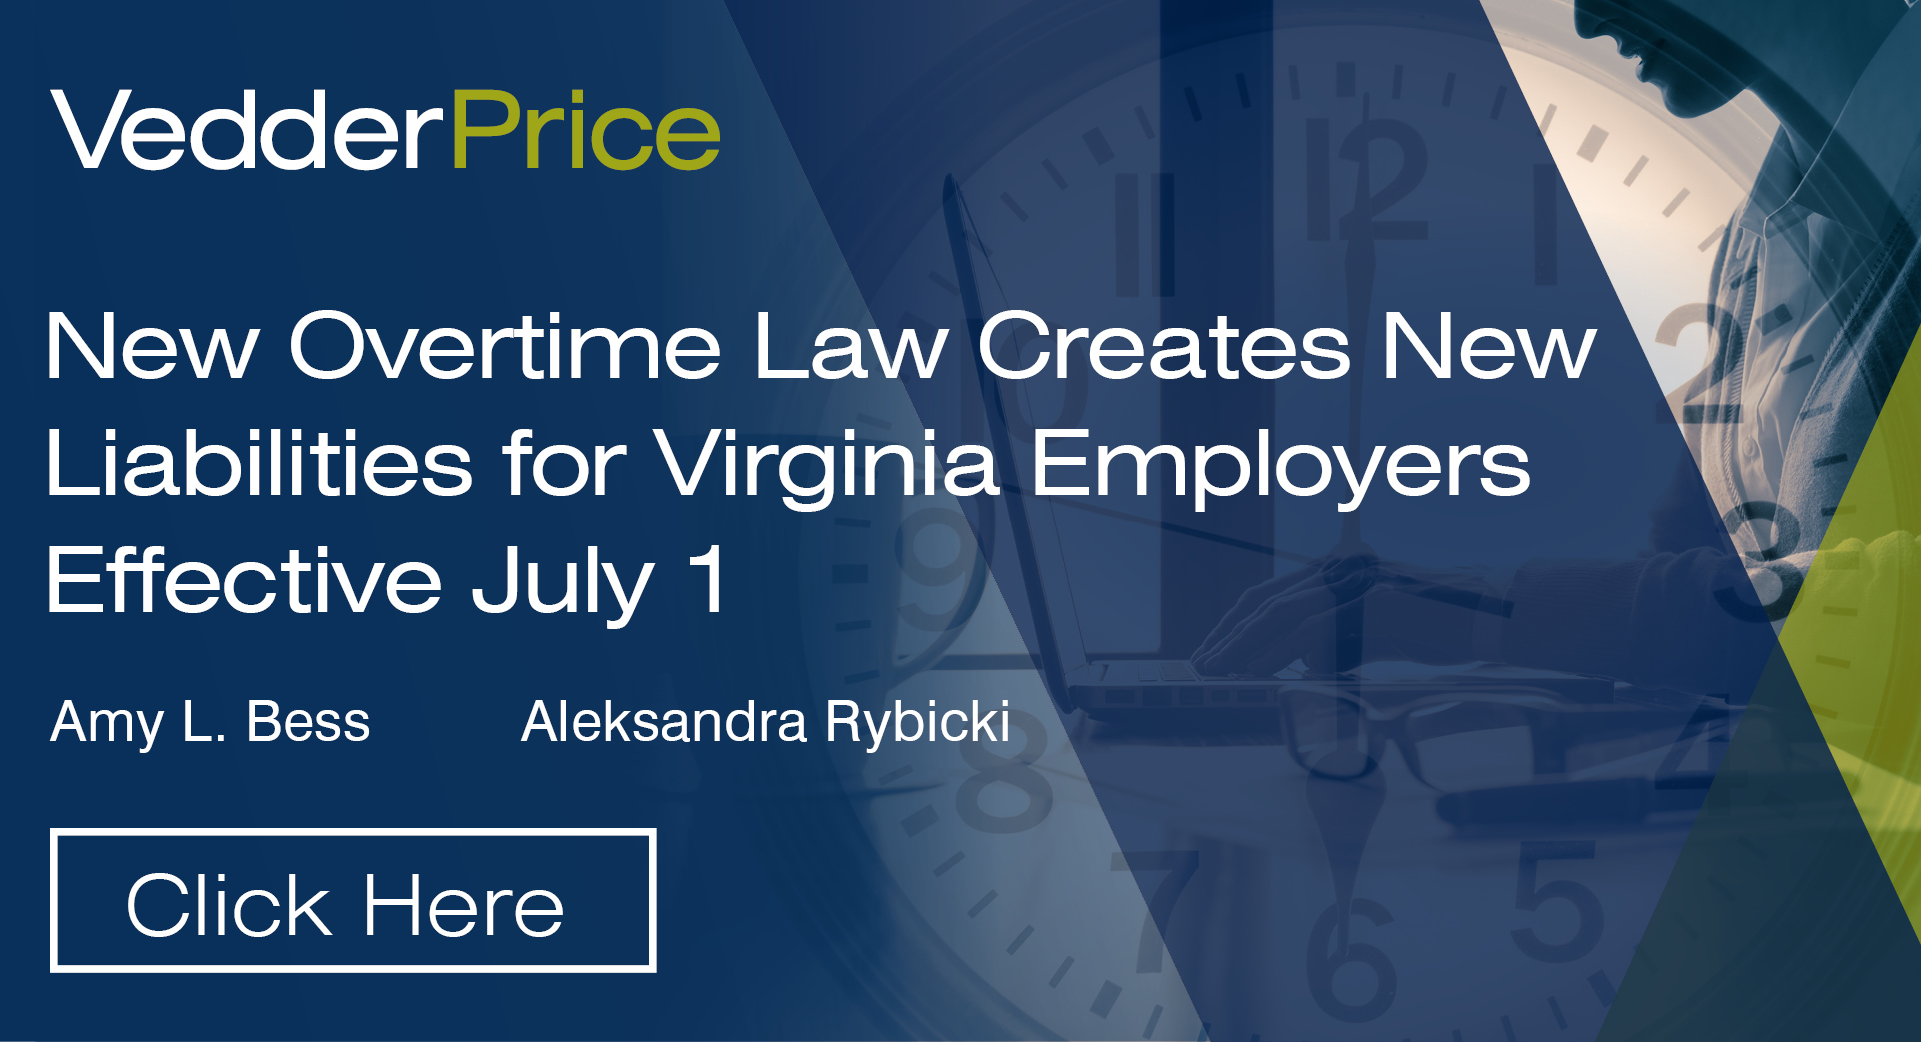 New Overtime Law Creates New Liabilities for Virginia Employers